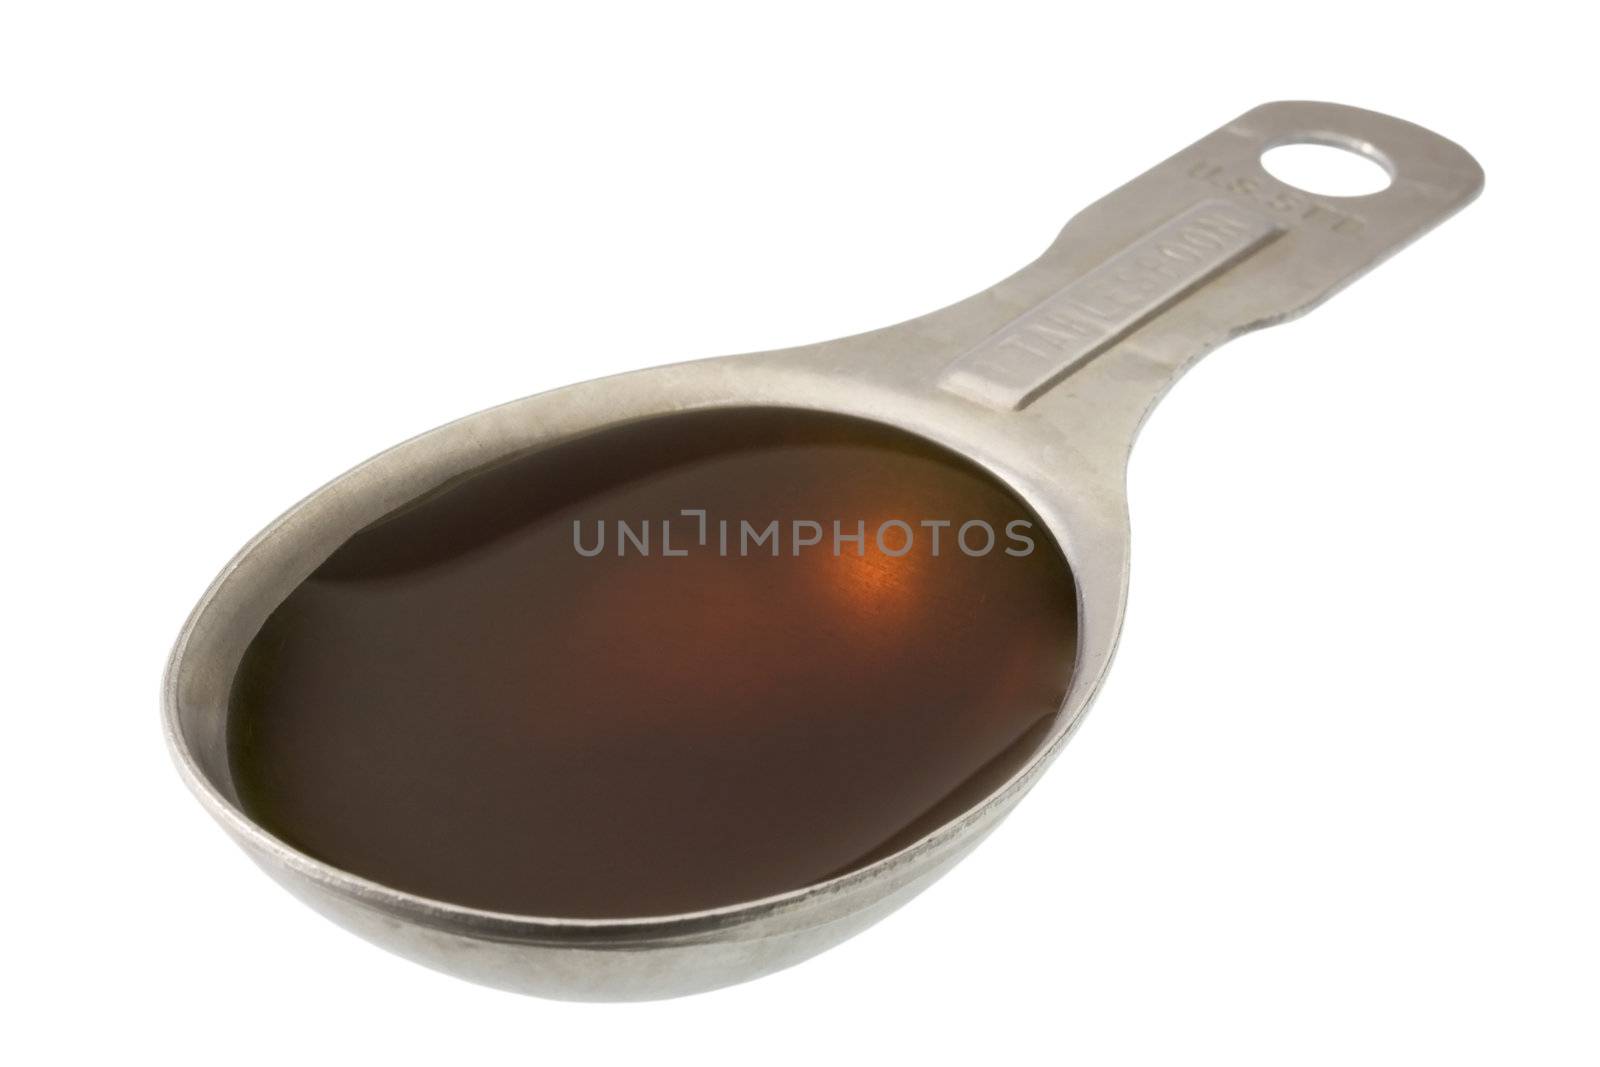 tablespoon of maple syrup by PixelsAway